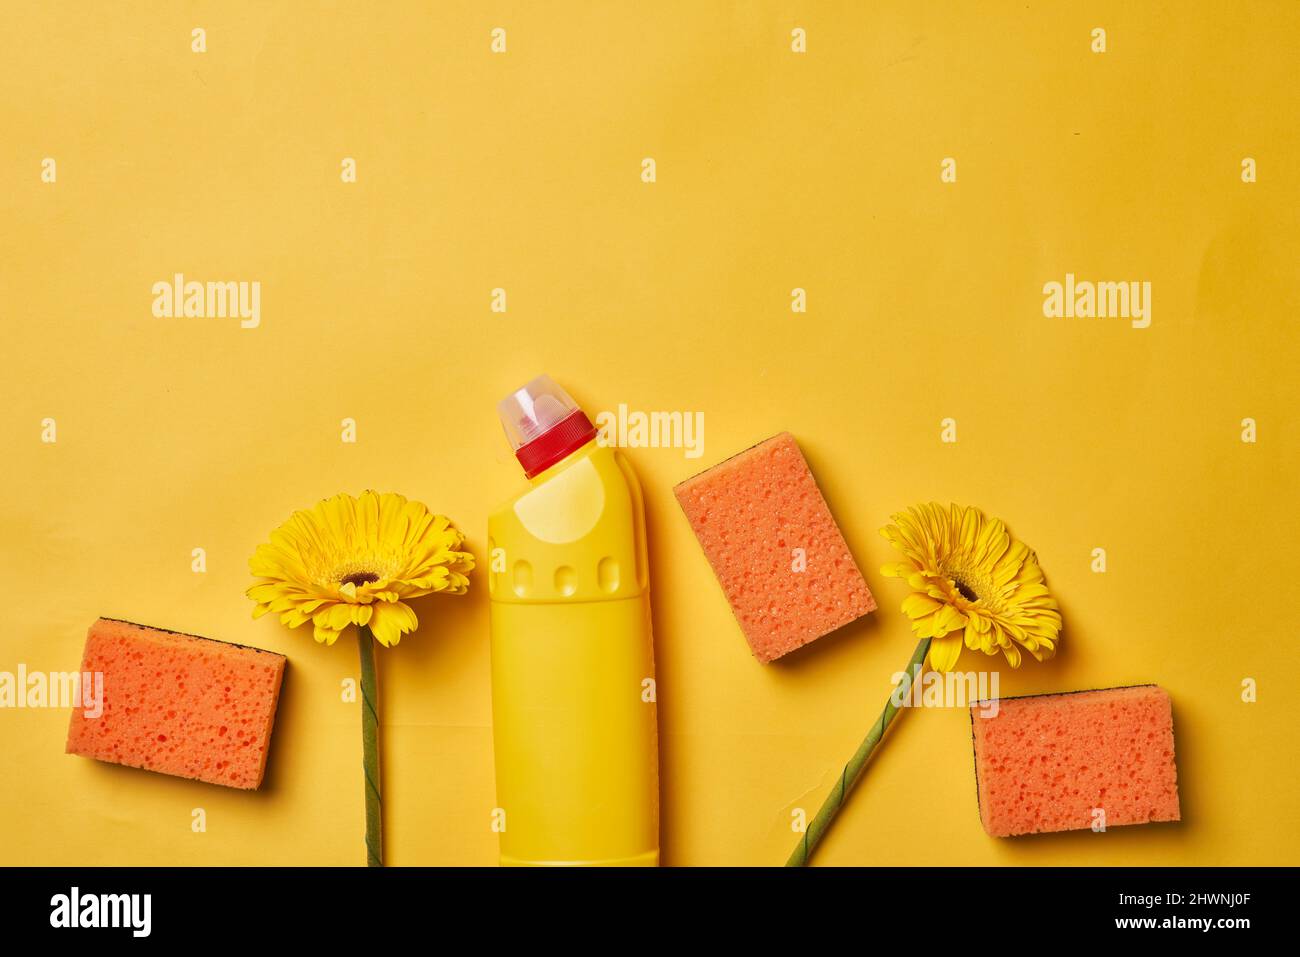 Cleaning service concept. Spring cleaning. Cleaning chemical bottles and supplies. House cleaning concept on colored background Stock Photo